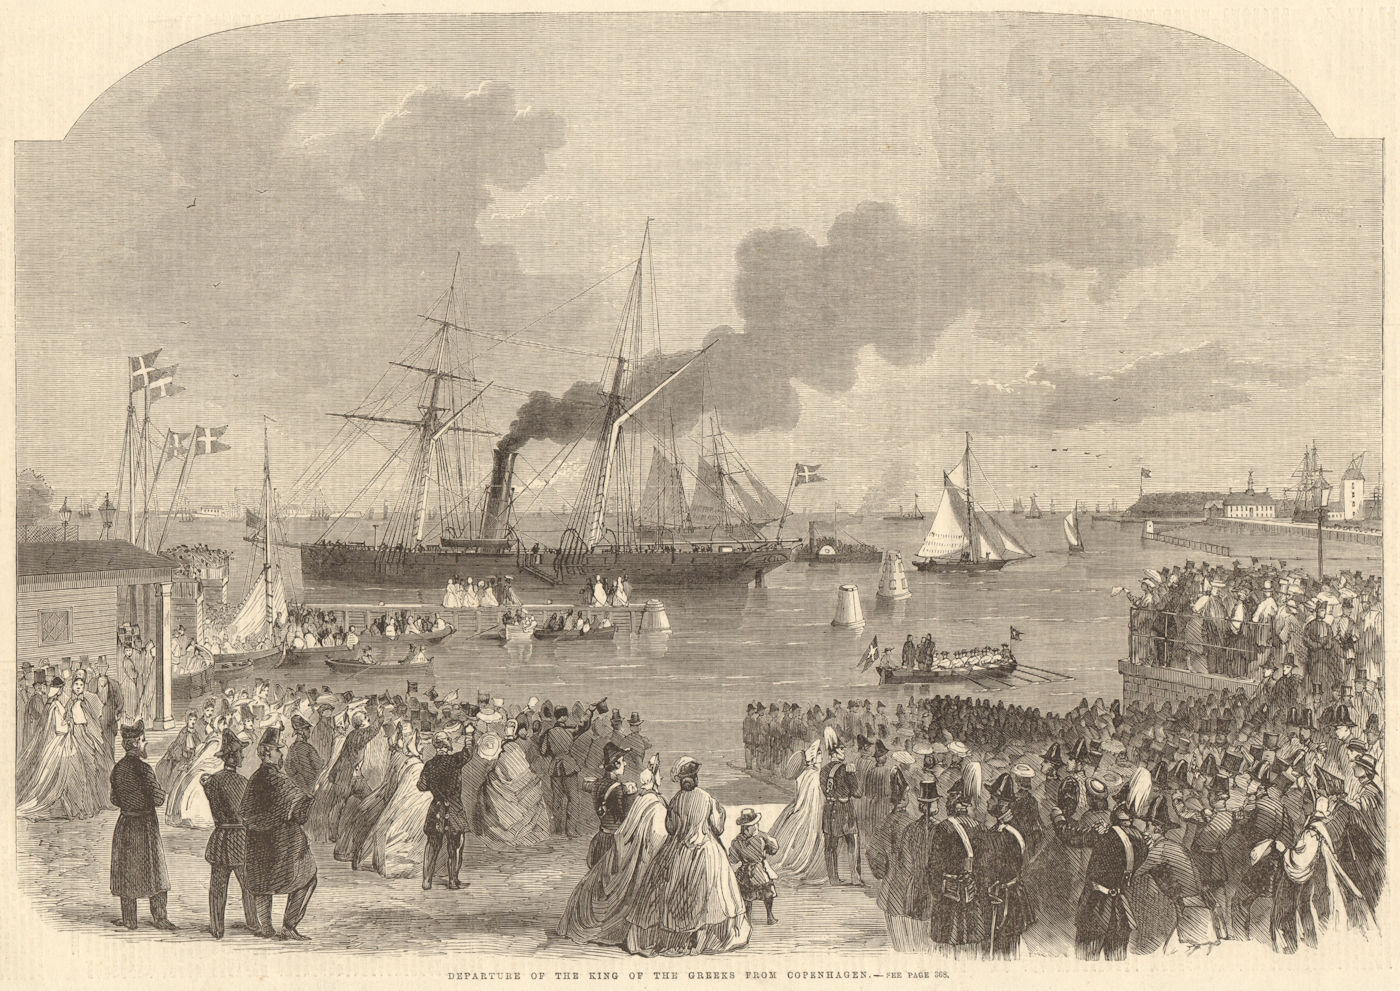 Associate Product Departure of the King of the Greeks from Copenhagen. Denmark. Ships 1863 print